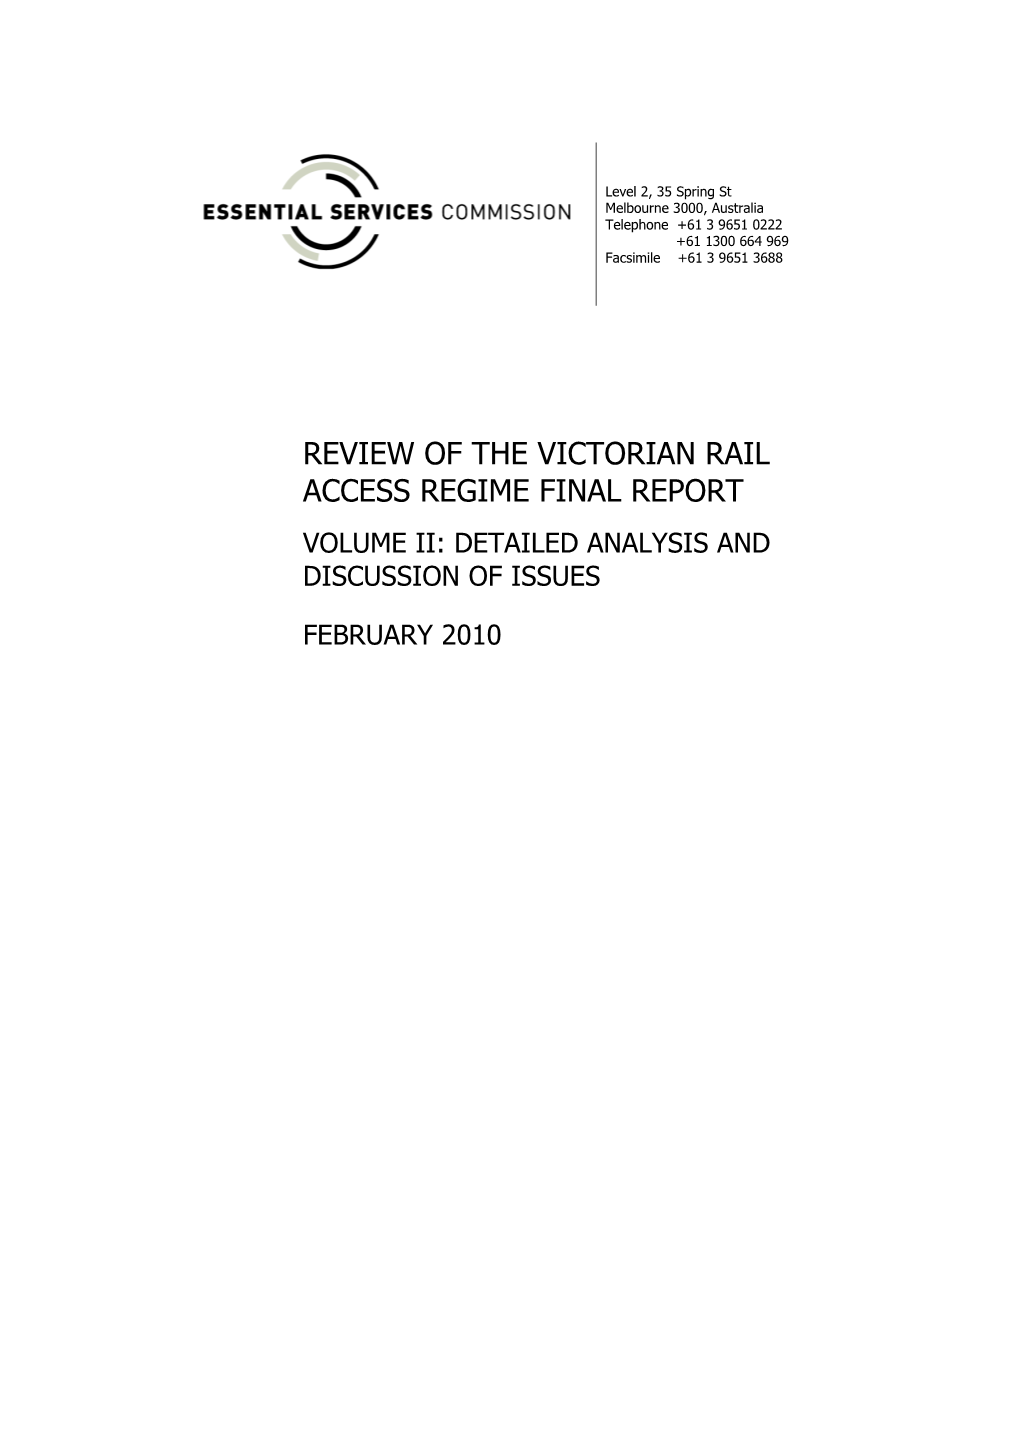 Review of the Victorian Rail Access Regime Final Report Volume Ii: Detailed Analysis and Discussion of Issues